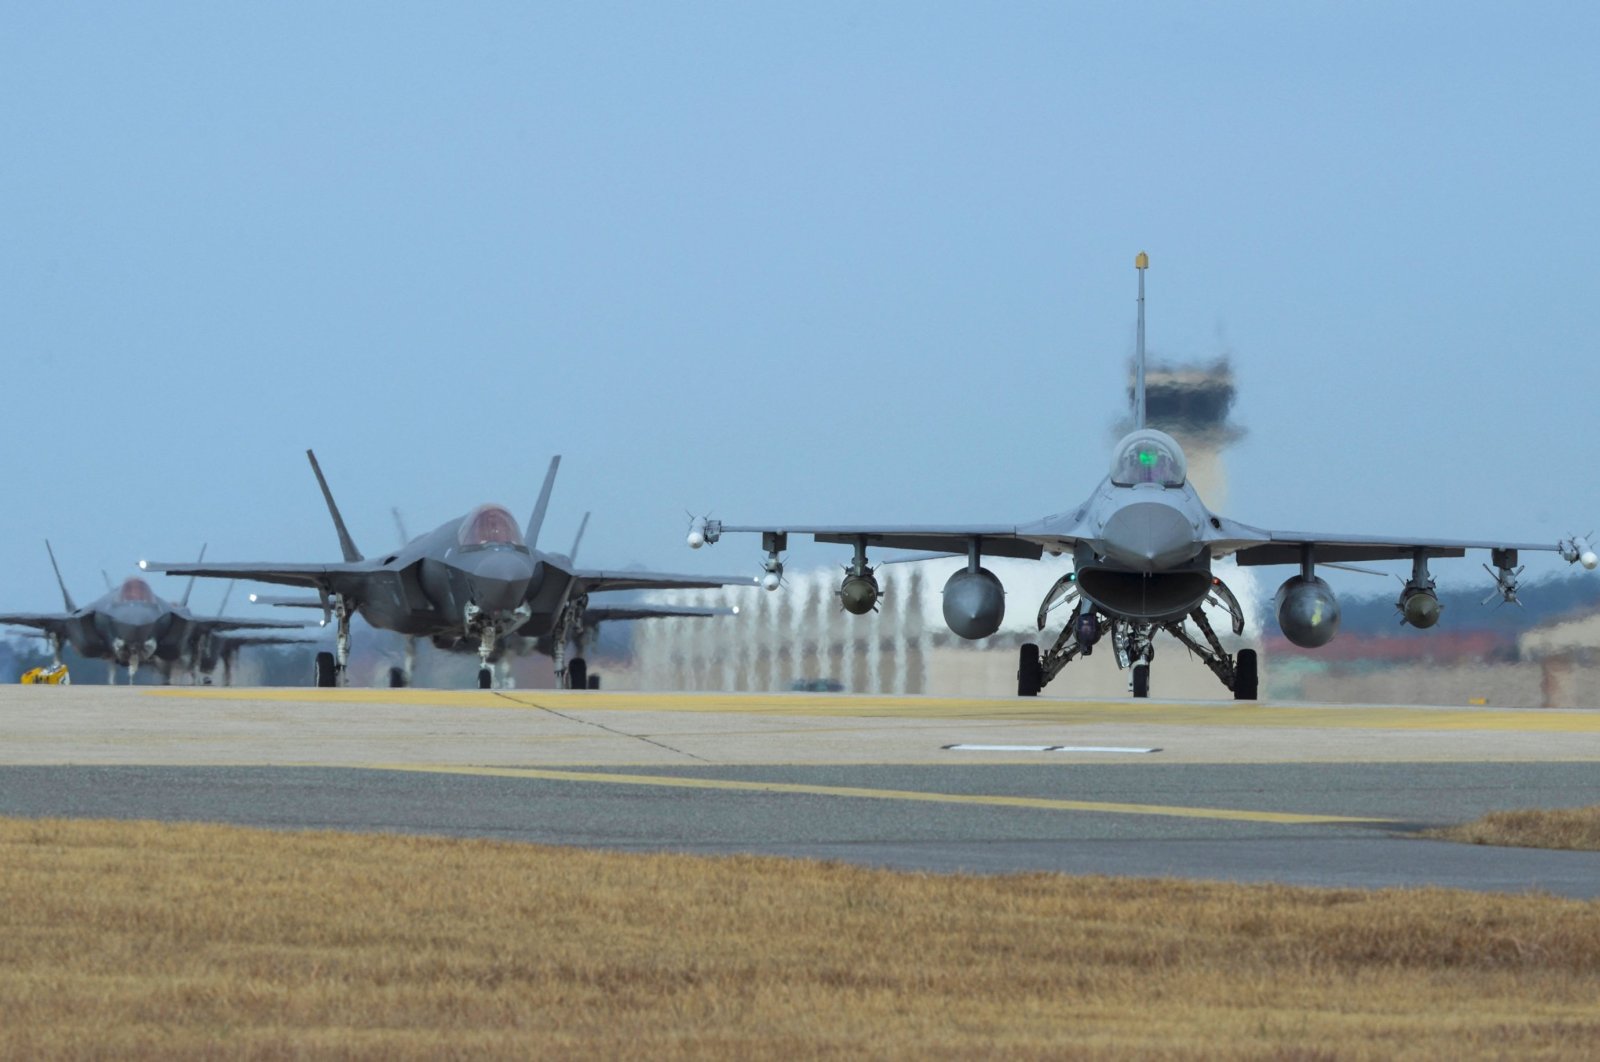 U.S. Air Force F-16 Fighting Falcon (R) and F-35A Lightning II fighter jets taxi at Kunsan Air Base in the southwestern port city of Gunsan, South Korea. (U.S. Air Force via AFP)